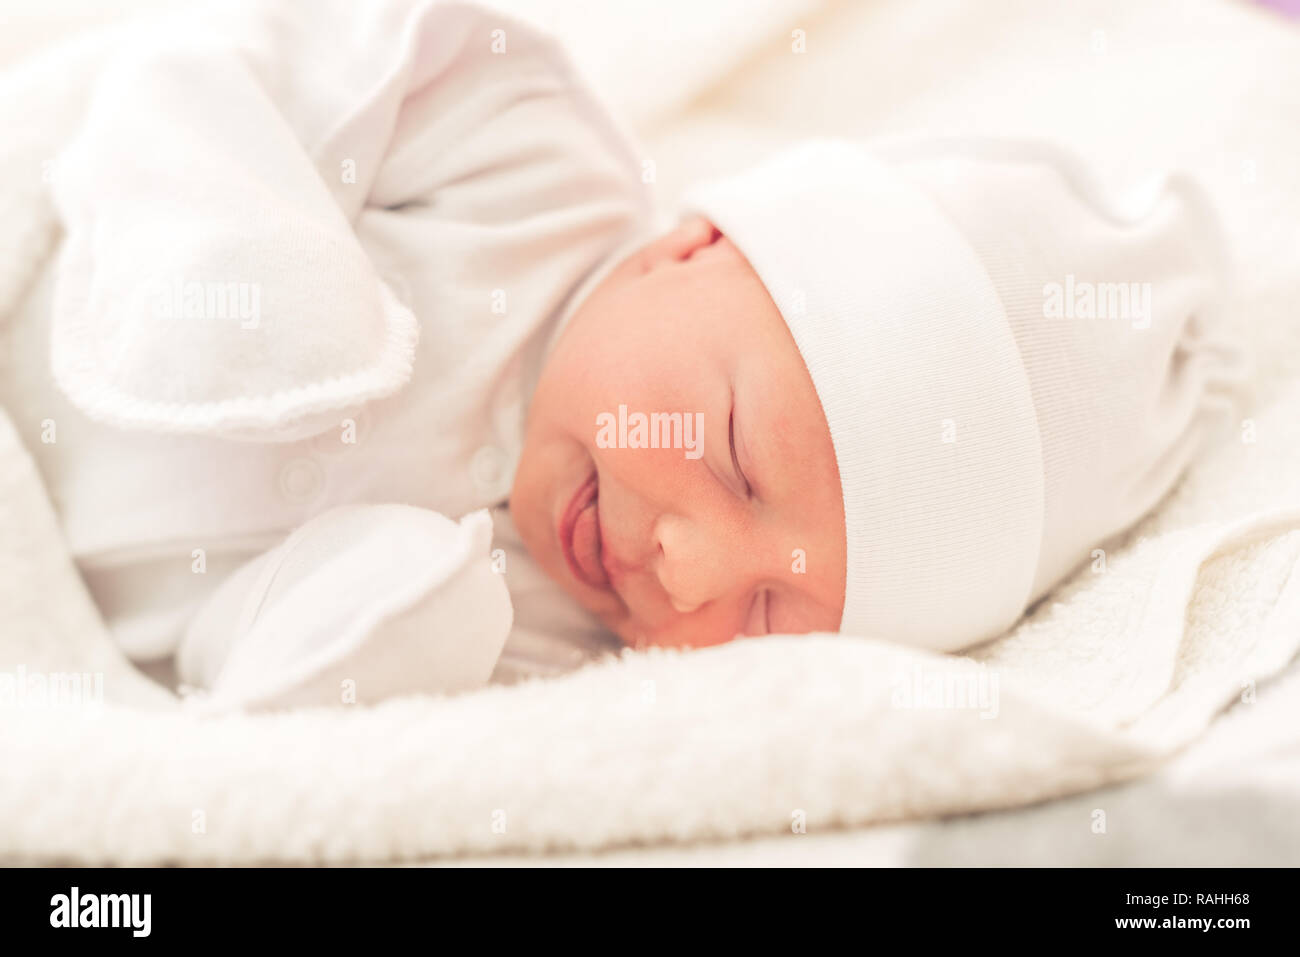 Sleepy baby close-up in a baby cot. Stock Photo